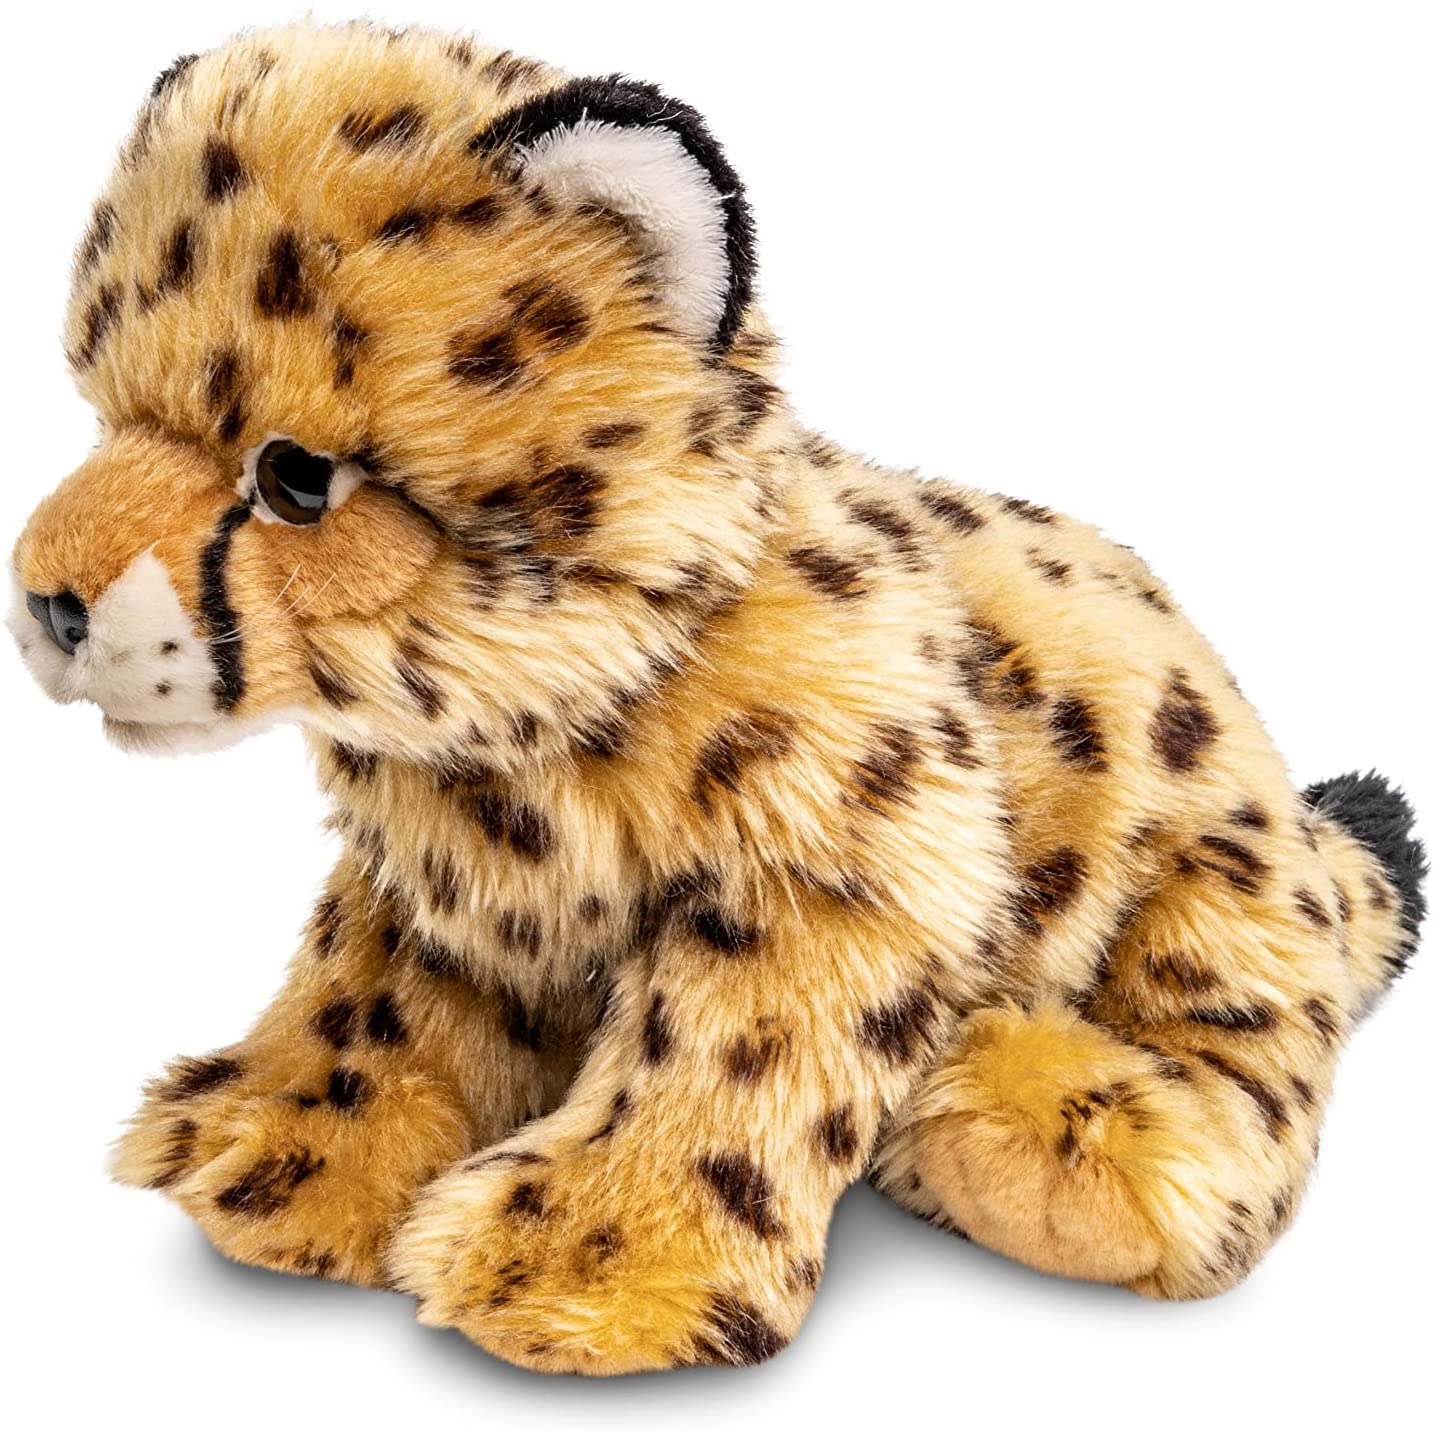  cheetah young, sitting - 22 cm (height) 